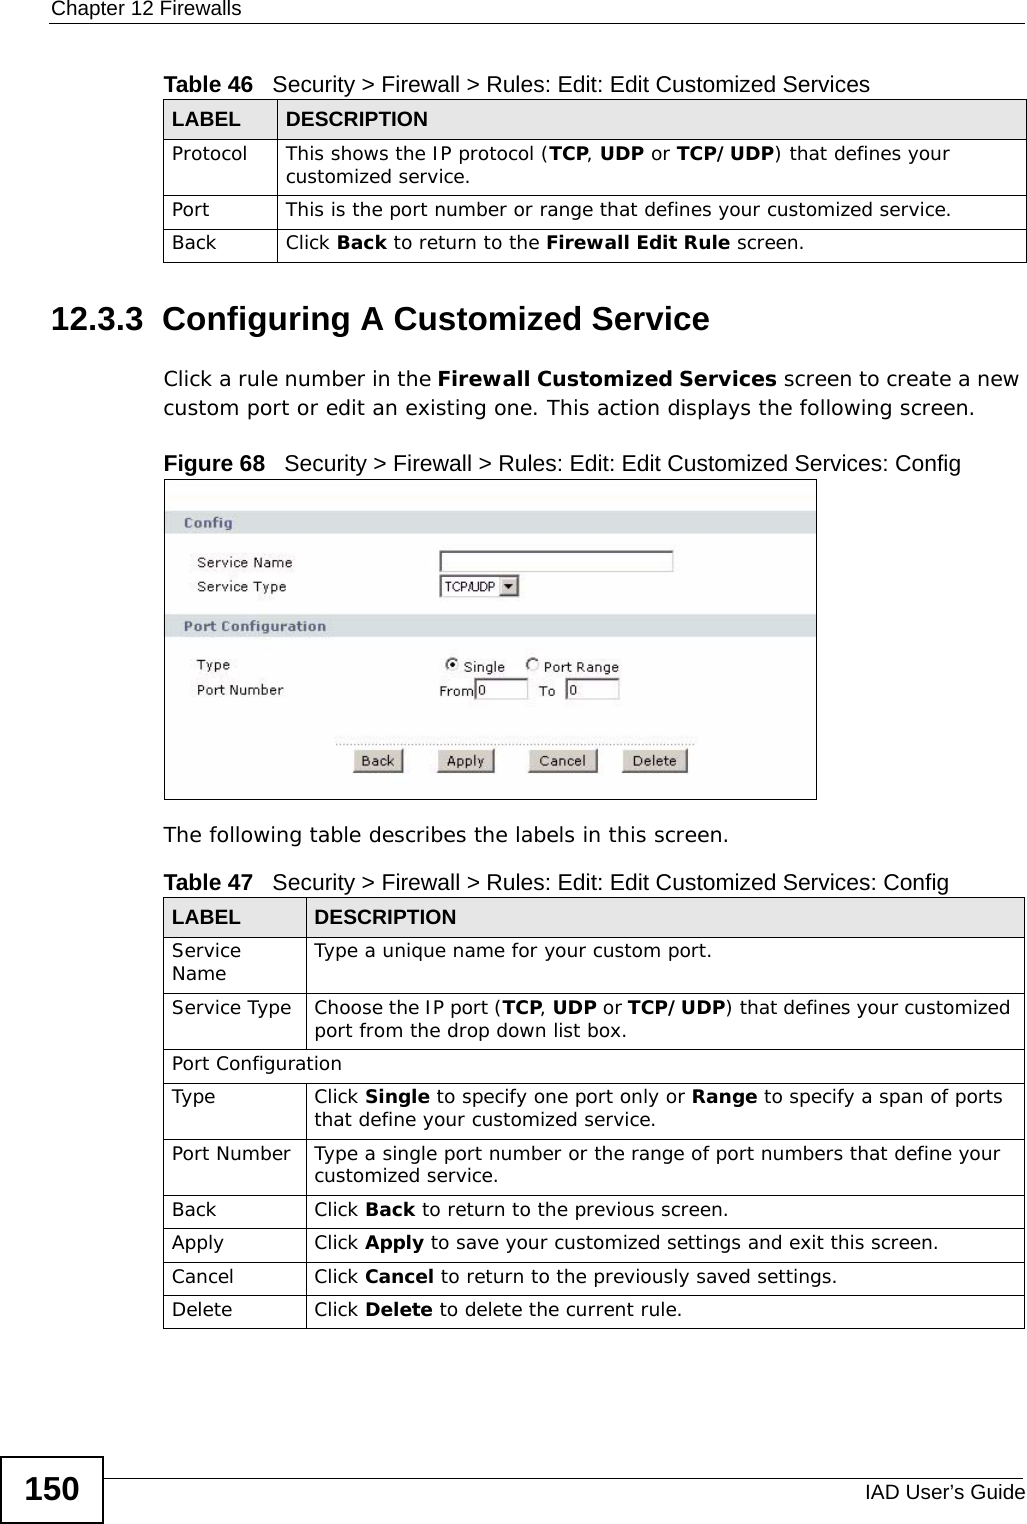 Chapter 12 FirewallsIAD User’s Guide15012.3.3  Configuring A Customized Service  Click a rule number in the Firewall Customized Services screen to create a new custom port or edit an existing one. This action displays the following screen.Figure 68   Security &gt; Firewall &gt; Rules: Edit: Edit Customized Services: ConfigThe following table describes the labels in this screen.Protocol This shows the IP protocol (TCP, UDP or TCP/UDP) that defines your customized service.Port This is the port number or range that defines your customized service.Back Click Back to return to the Firewall Edit Rule screen.Table 46   Security &gt; Firewall &gt; Rules: Edit: Edit Customized ServicesLABEL DESCRIPTIONTable 47   Security &gt; Firewall &gt; Rules: Edit: Edit Customized Services: ConfigLABEL DESCRIPTIONService Name Type a unique name for your custom port.Service Type Choose the IP port (TCP, UDP or TCP/UDP) that defines your customized port from the drop down list box.Port ConfigurationType Click Single to specify one port only or Range to specify a span of ports that define your customized service. Port Number Type a single port number or the range of port numbers that define your customized service.Back Click Back to return to the previous screen.Apply Click Apply to save your customized settings and exit this screen.Cancel Click Cancel to return to the previously saved settings.Delete Click Delete to delete the current rule.